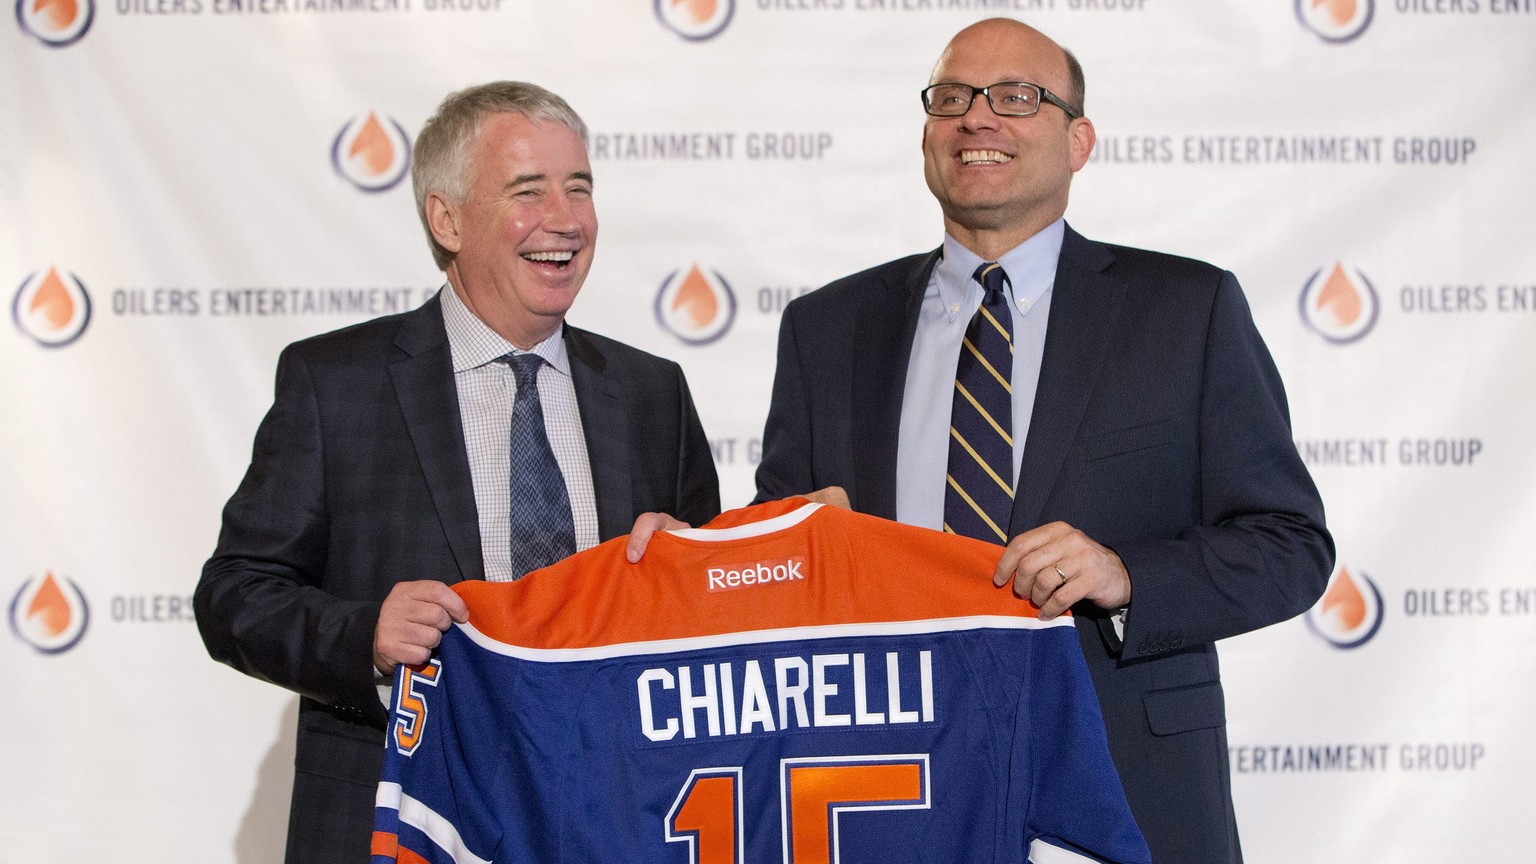 Edmonton Oilers CEO Bob Nicholson, left, and new President and General Manager Peter Chiarelli hold up an Oilers jersey with Chiarelli&#039;s name on it during an NHL hockey press conference in Edmont ...